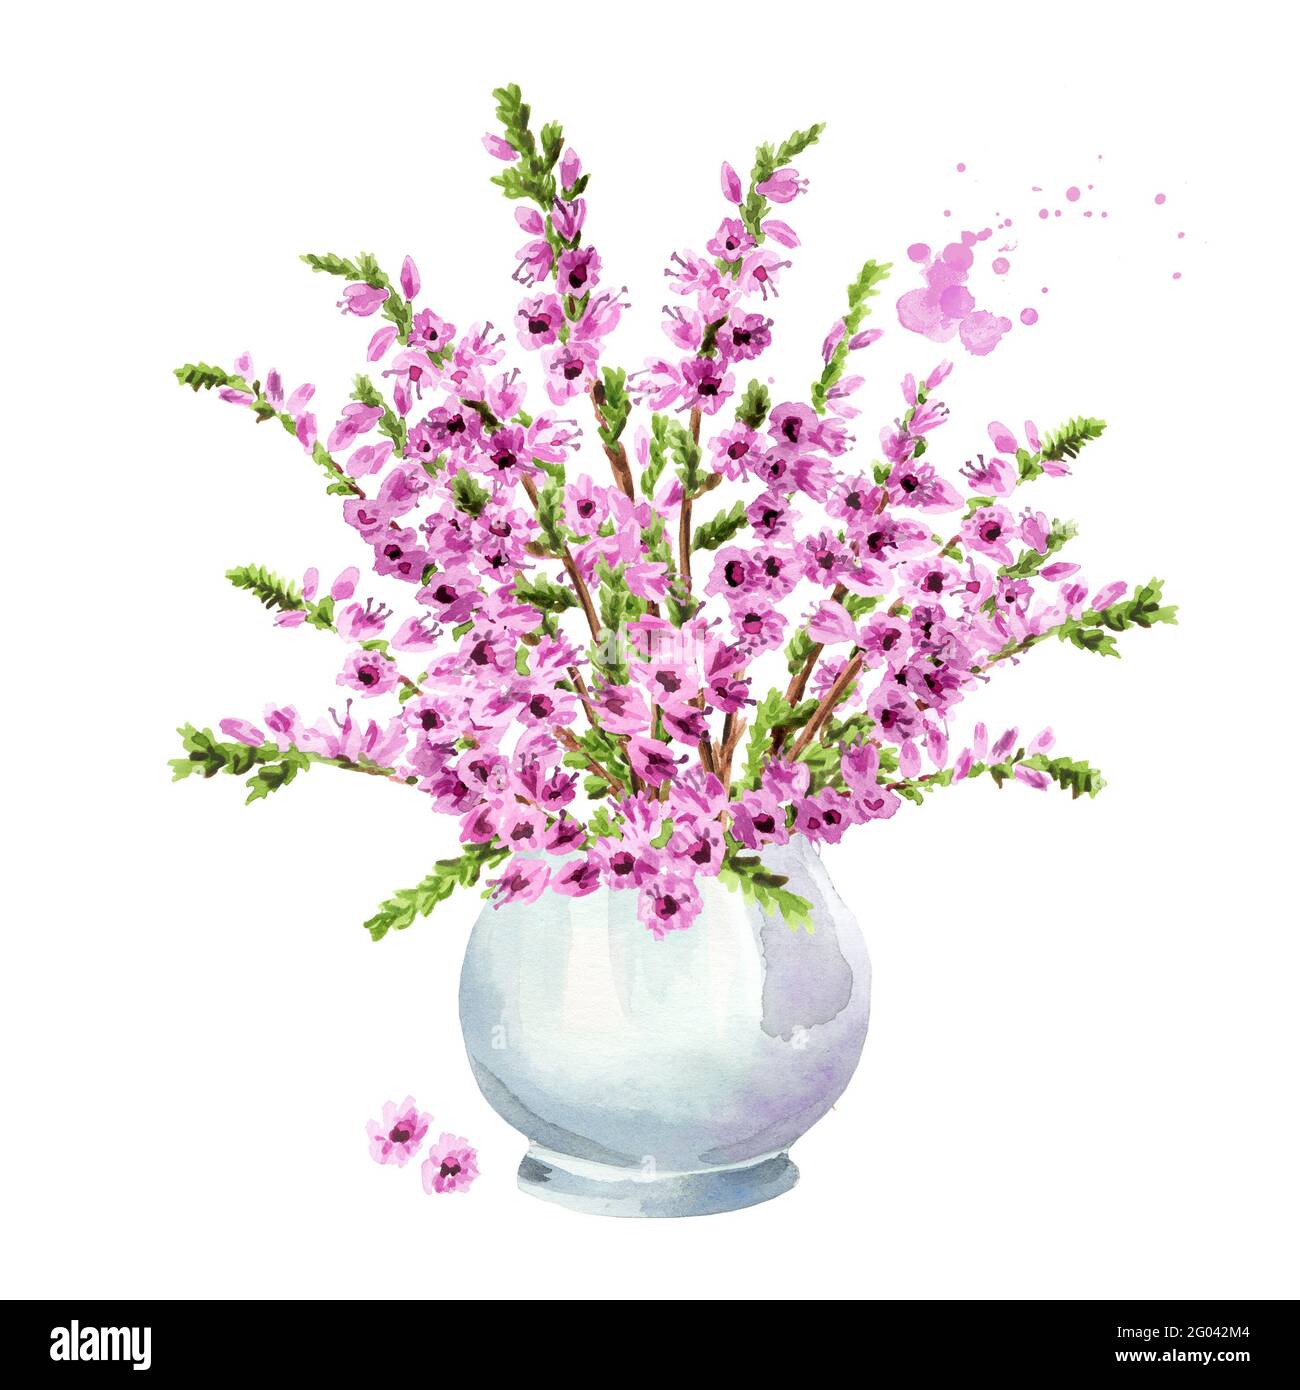 Vase with Purple heather flowers, symbol of good luck. Watercolor hand drawn illustration isolated on white background Stock Photo